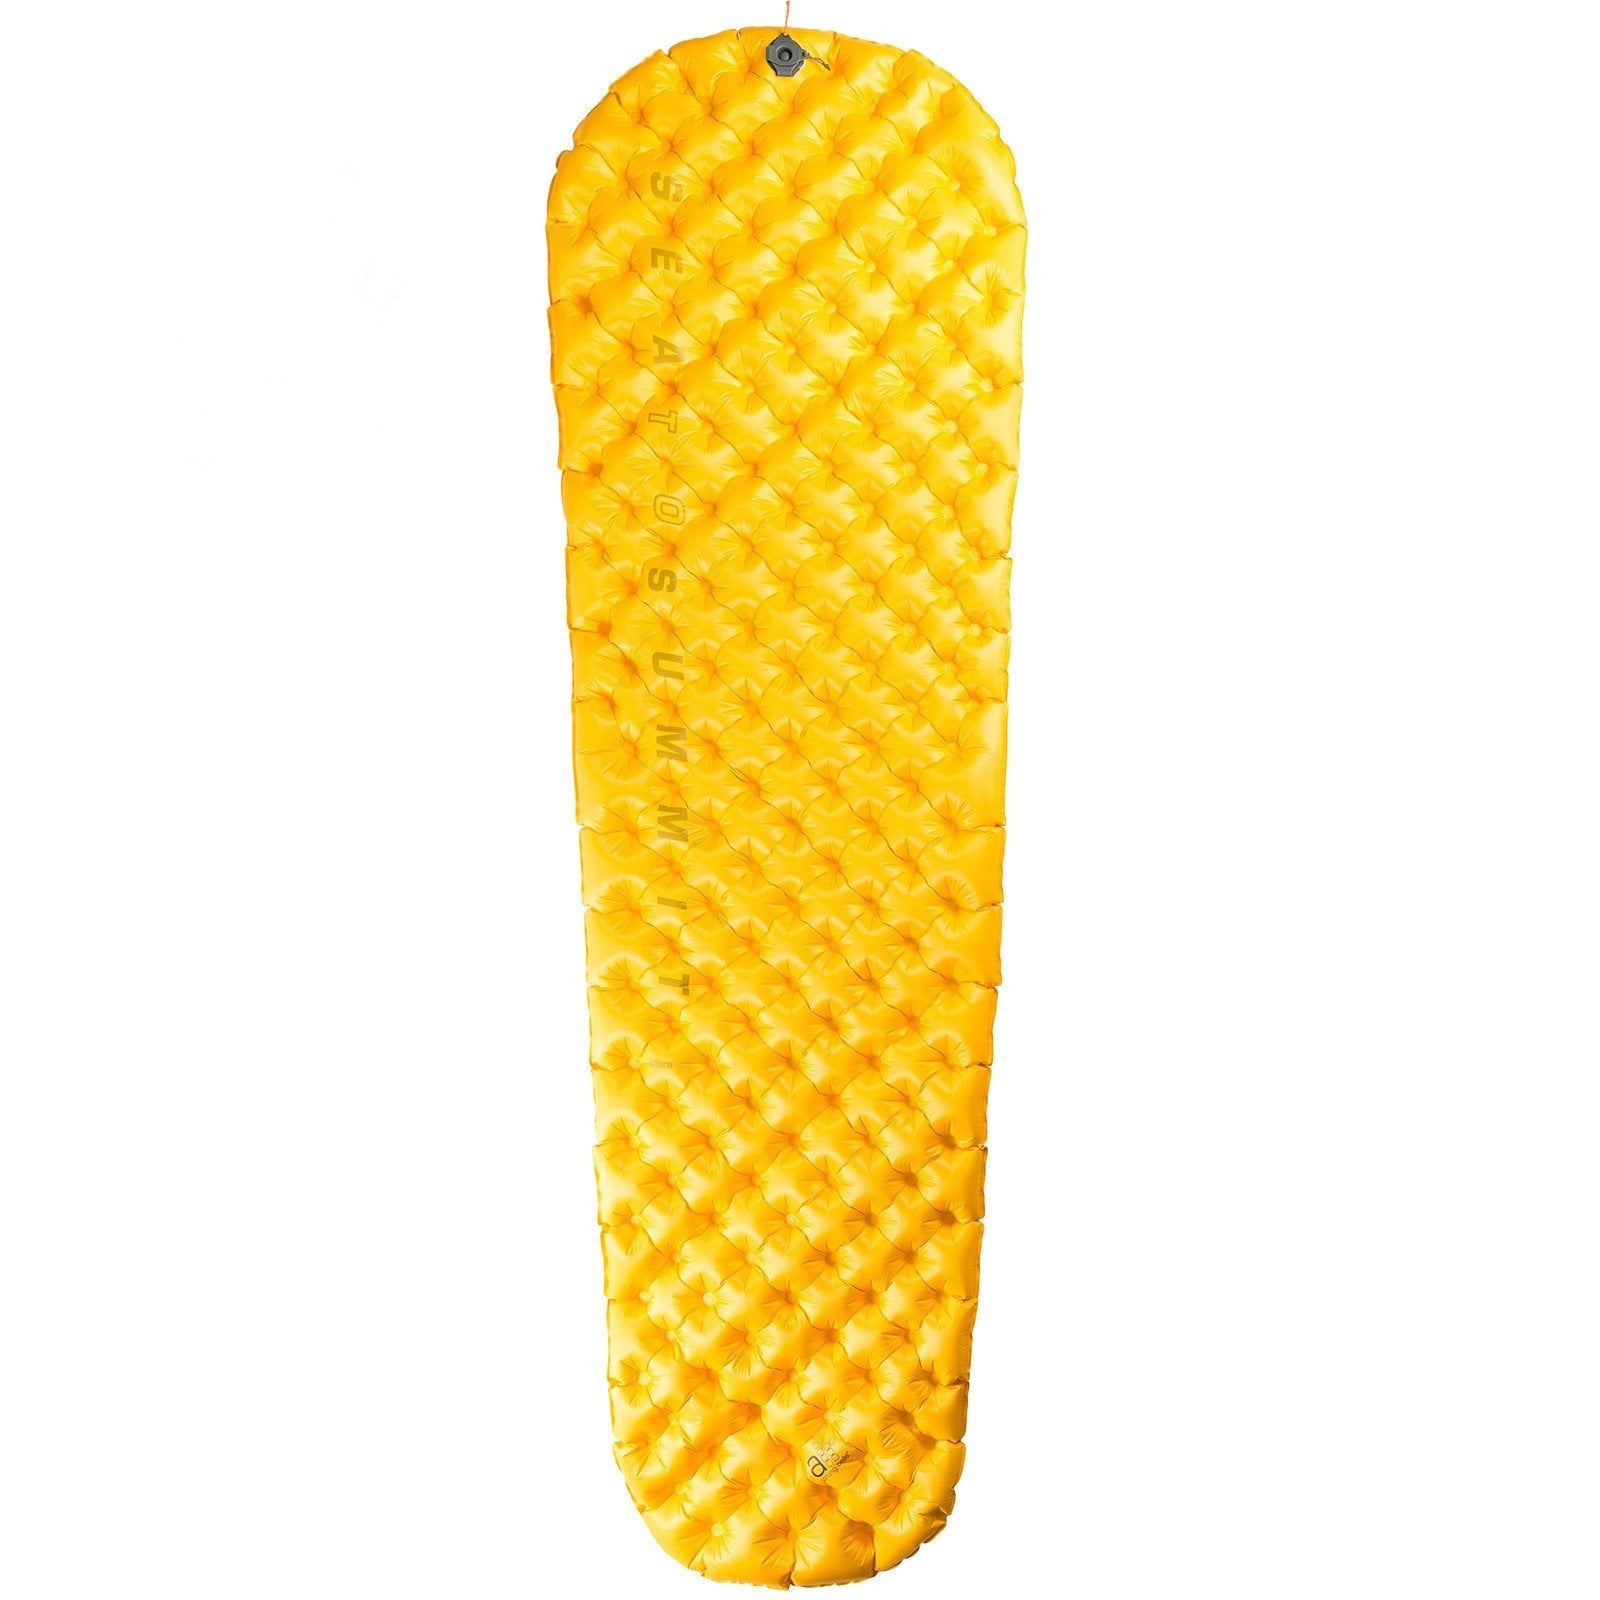 Sea to Summit UltraLight Mat, full view shown stood upright in yellow colour